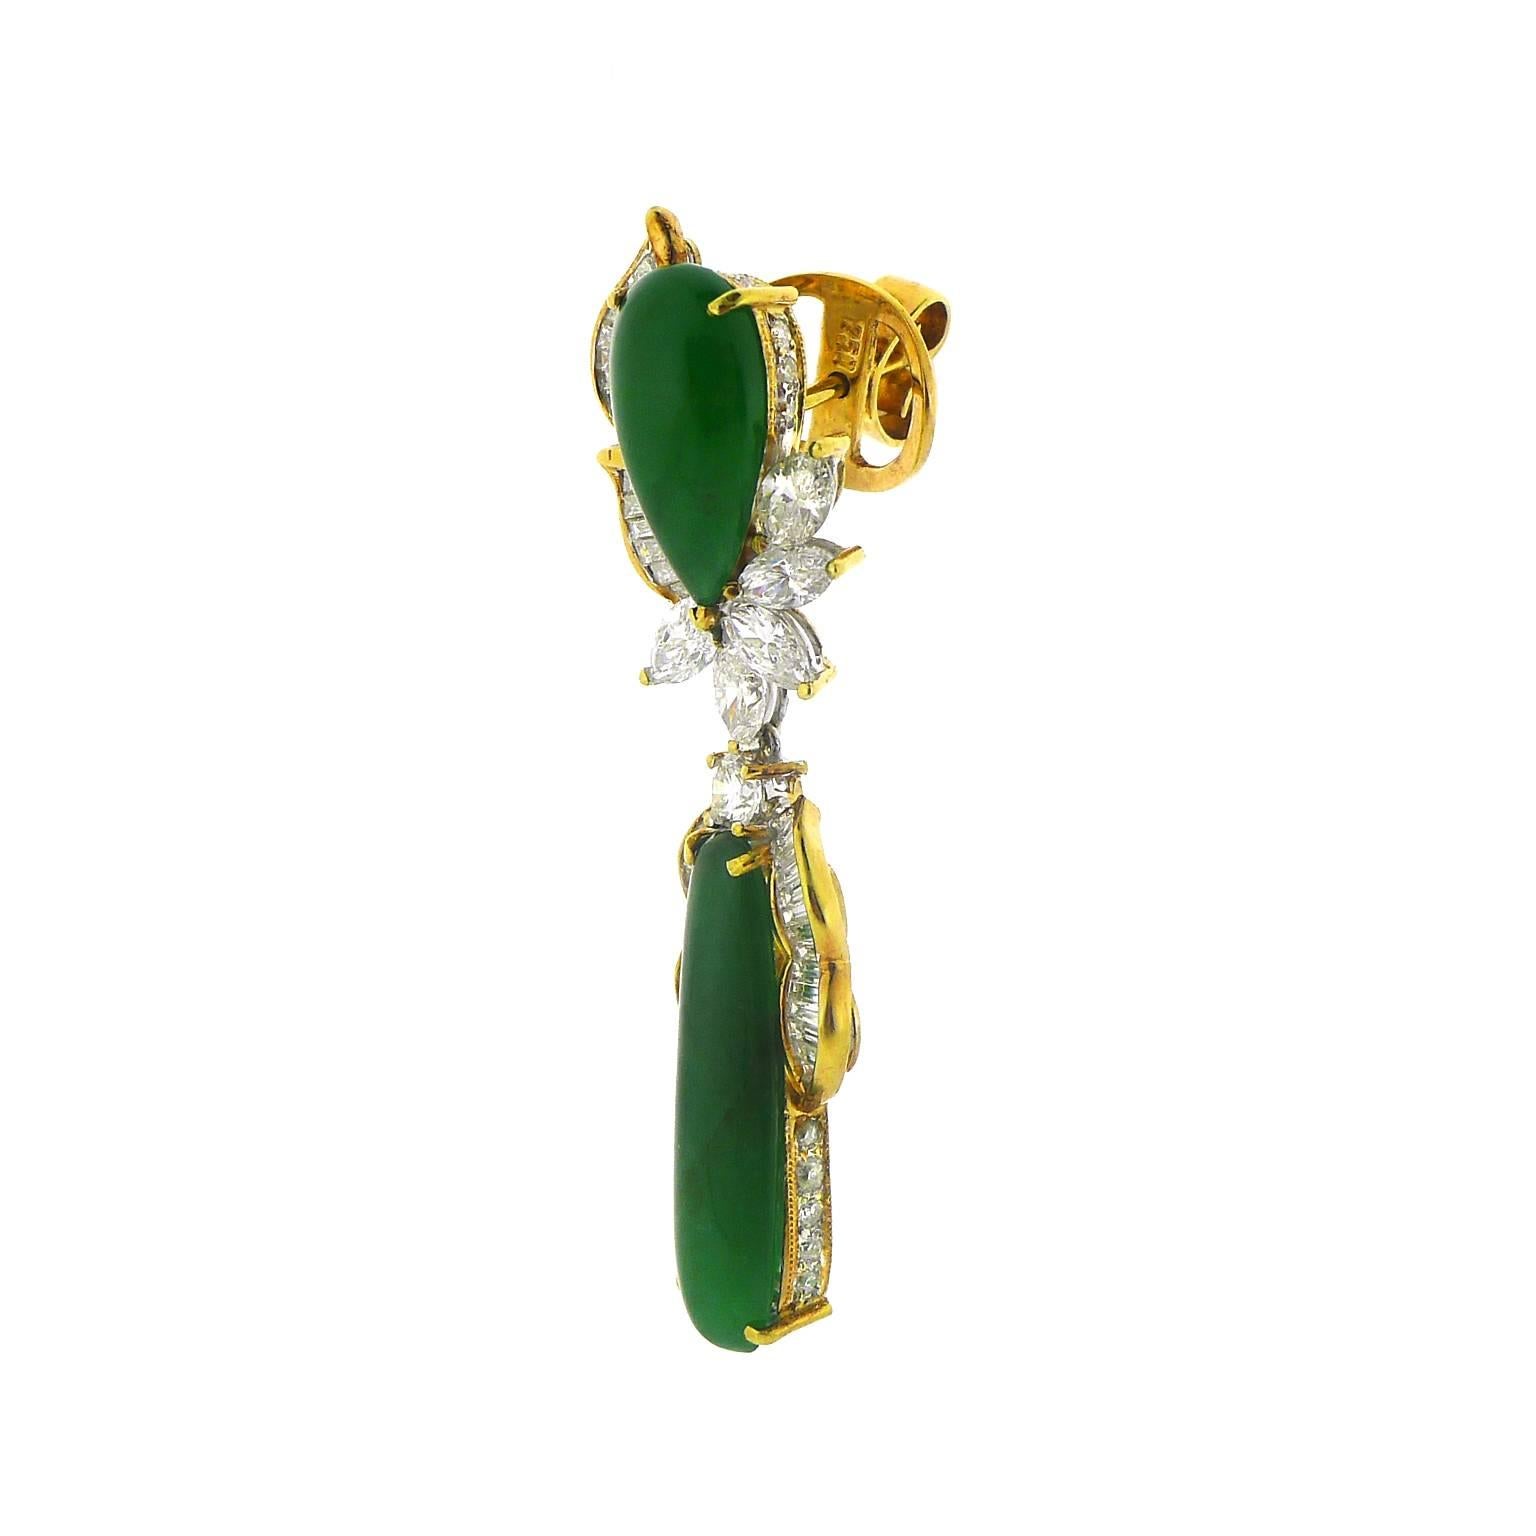 All four jadeites have a GIA certificate stating that the stones are jadeite jade, translucent, natural color with no indications of impregnation. The stones weigh 14.05 grams all together. There are ten marquise shaped diamonds totaling